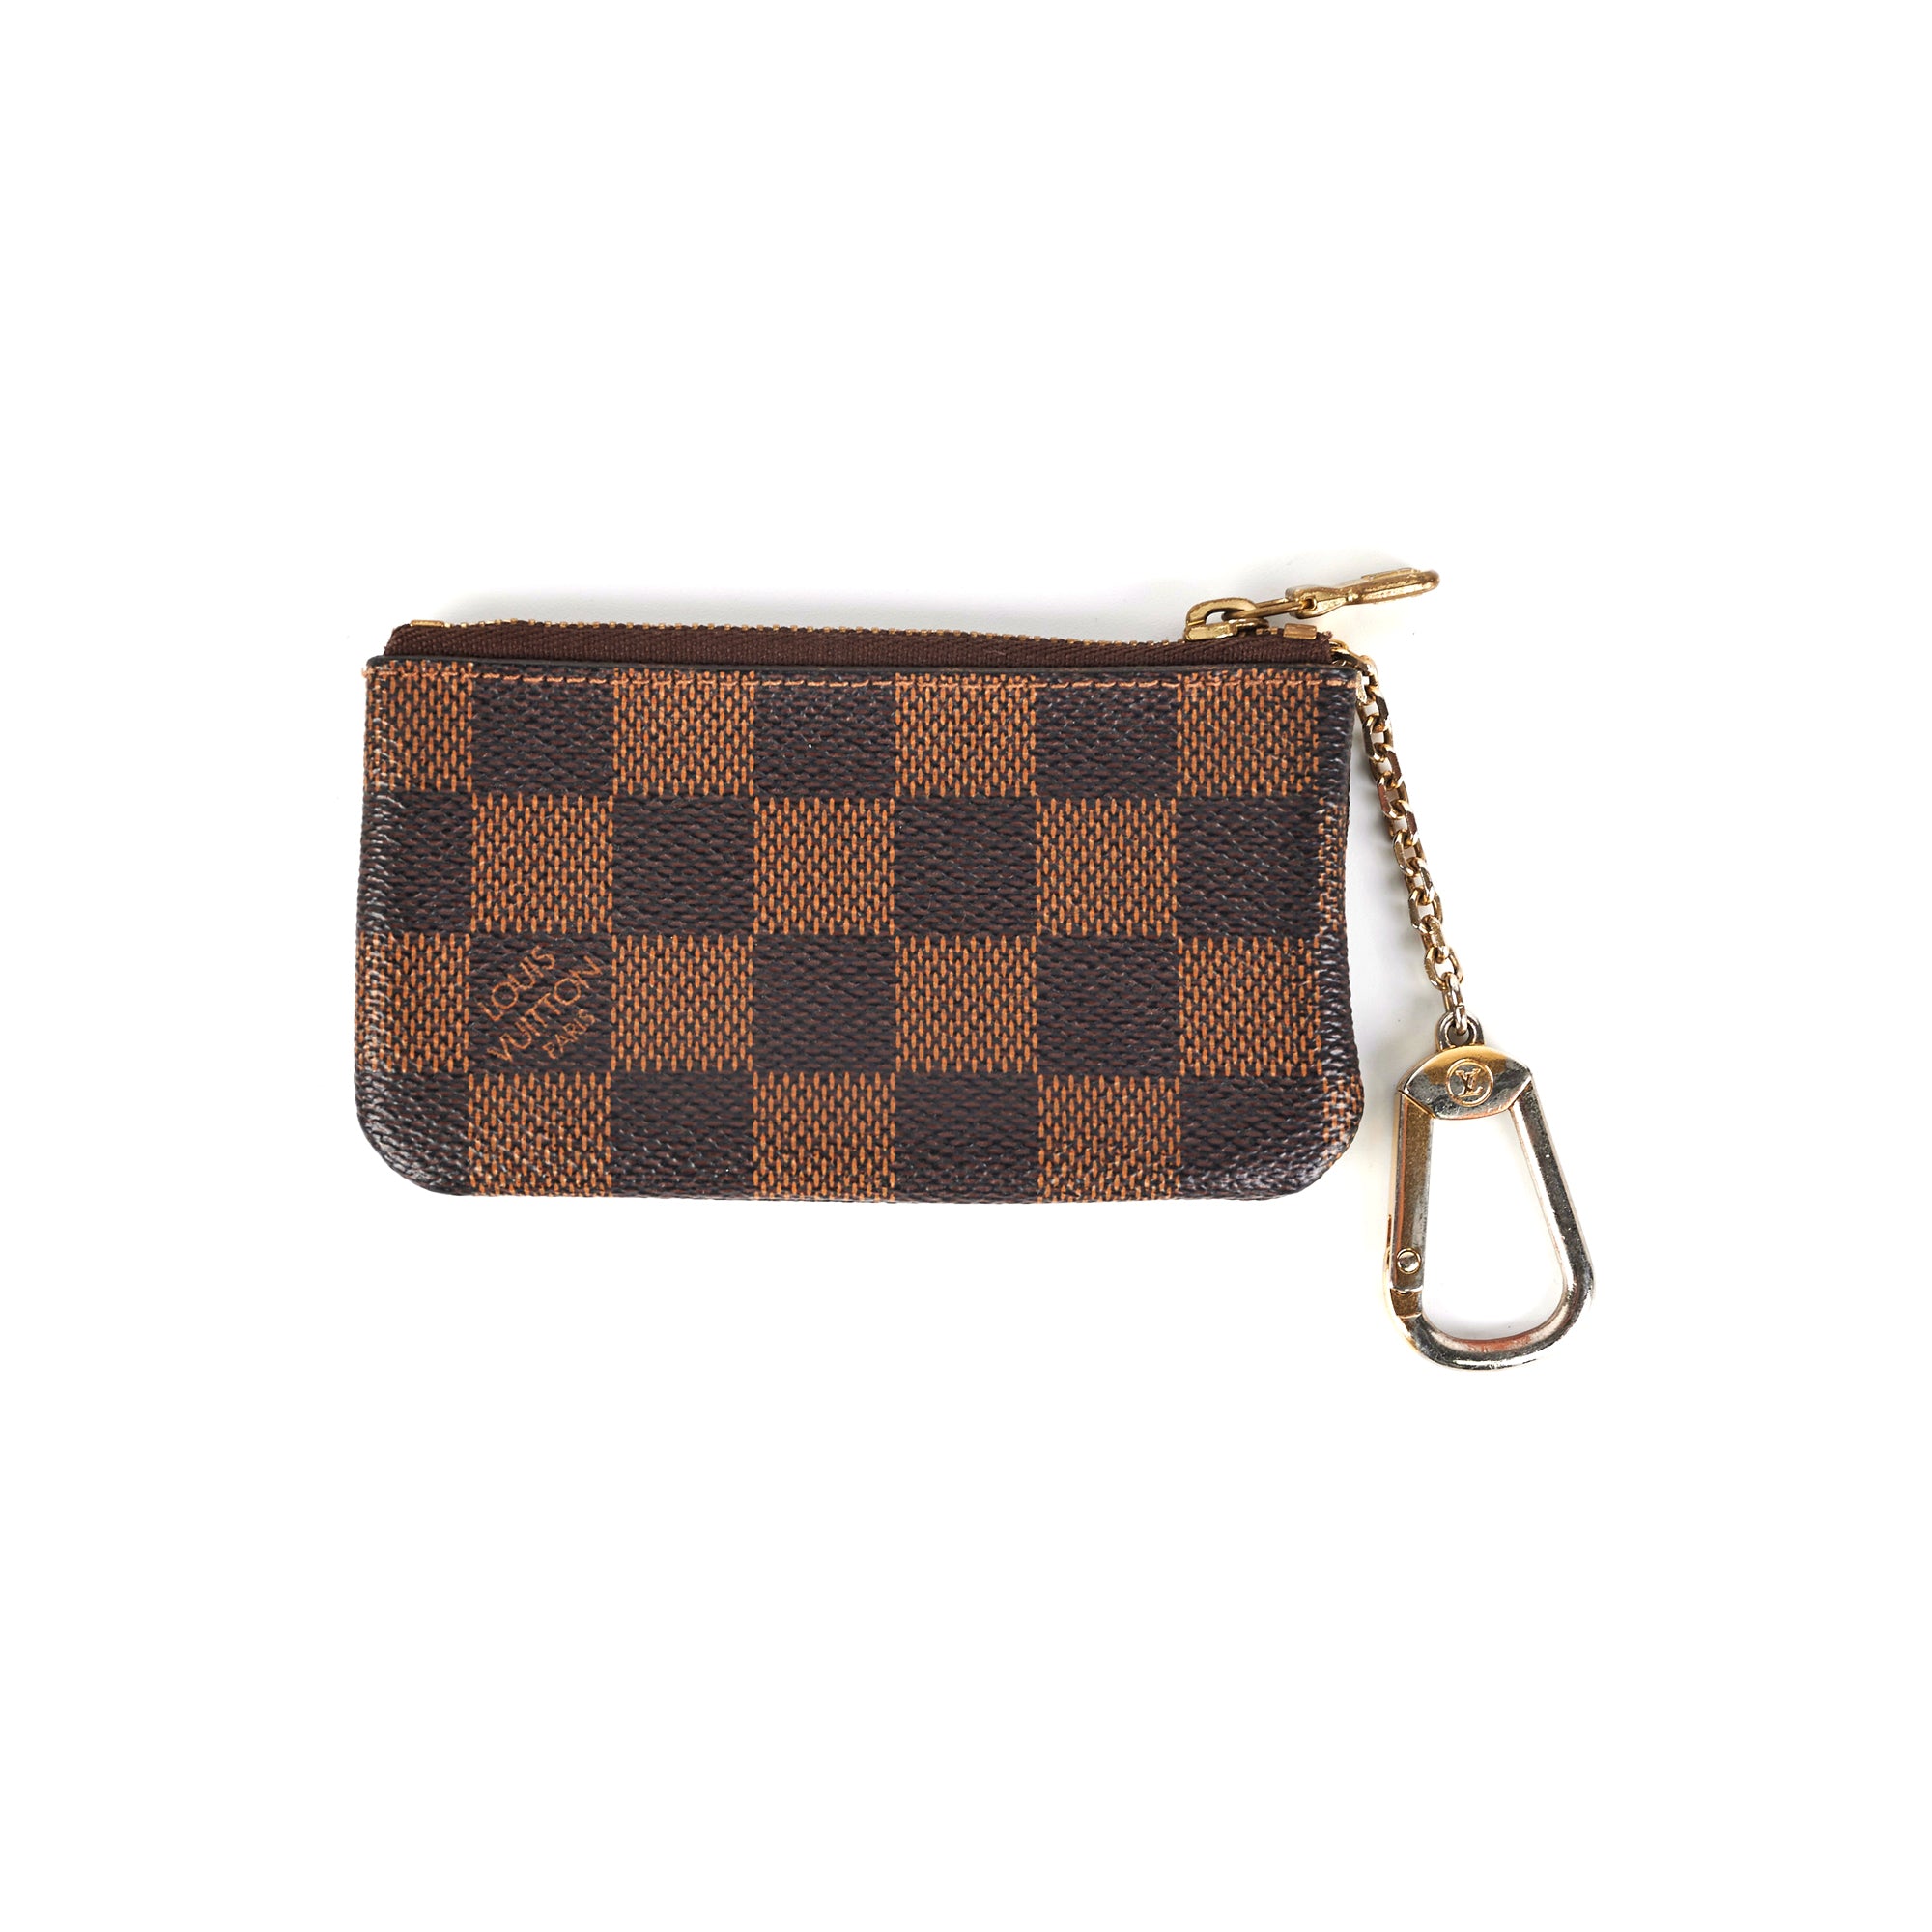 Louis Vuitton Credit Card And Key Holder